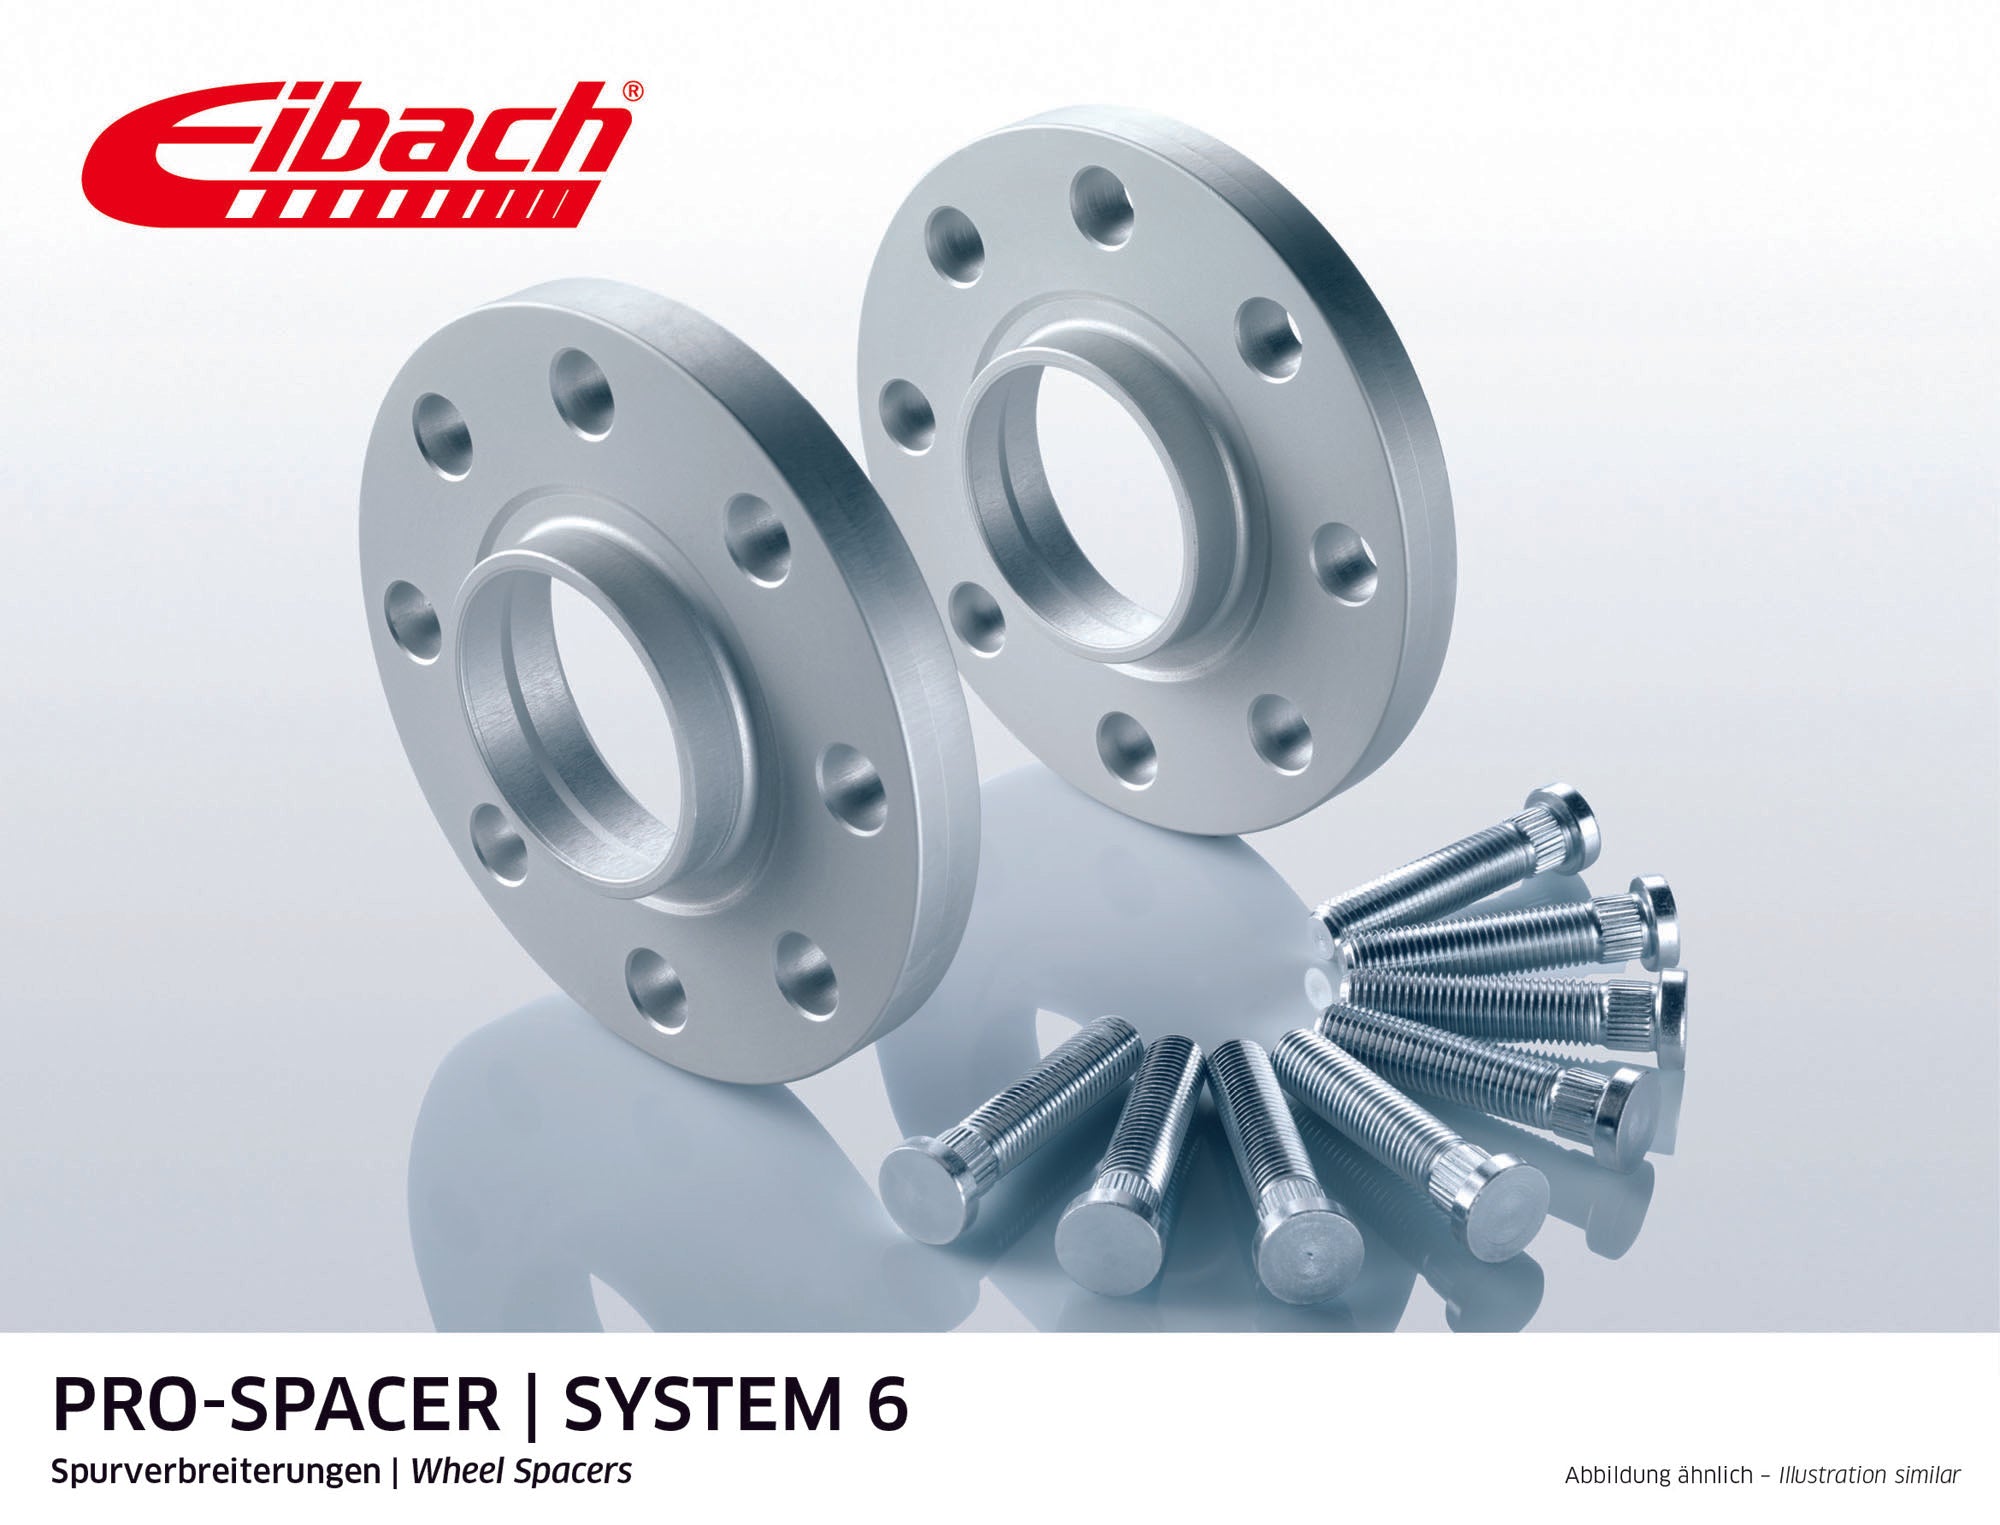 Eibach 15mm Pro-Spacer - Silver Anodized Wheel Spacer 911 1982-89 #S90-6-15-018